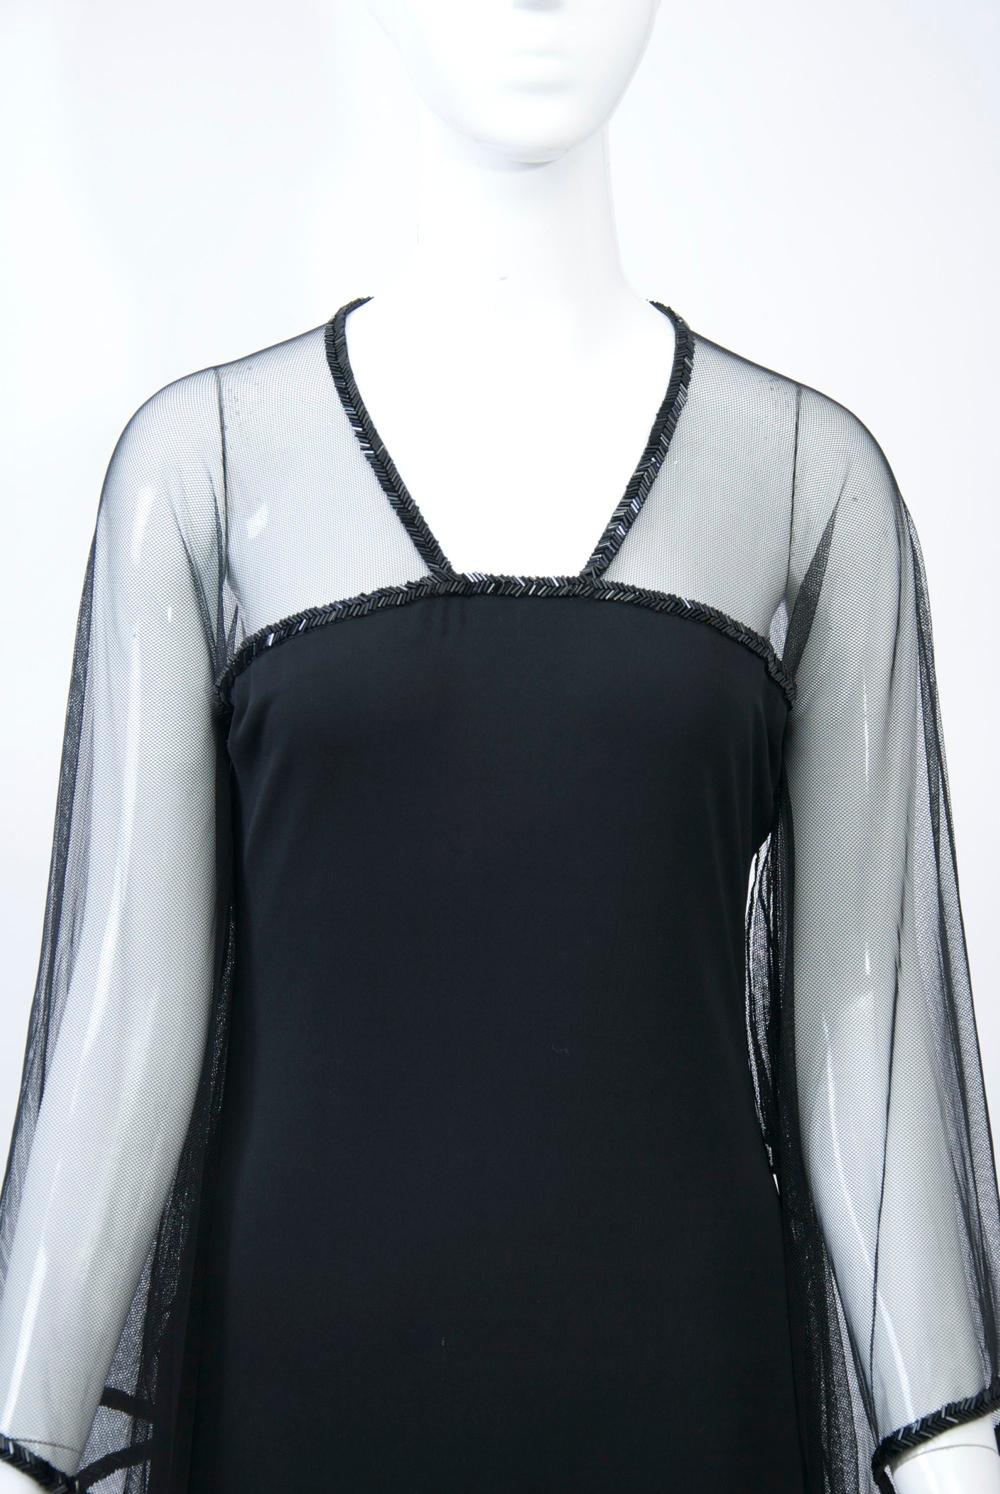 Amy Michelson for Holly Harp 1990s long black dress featuring sheer netting above the bust for the V neckline and raglan bell sleeves, the edges trimmed with a row of black herringbone beads. Below the netting, the black jersey body skims the body.